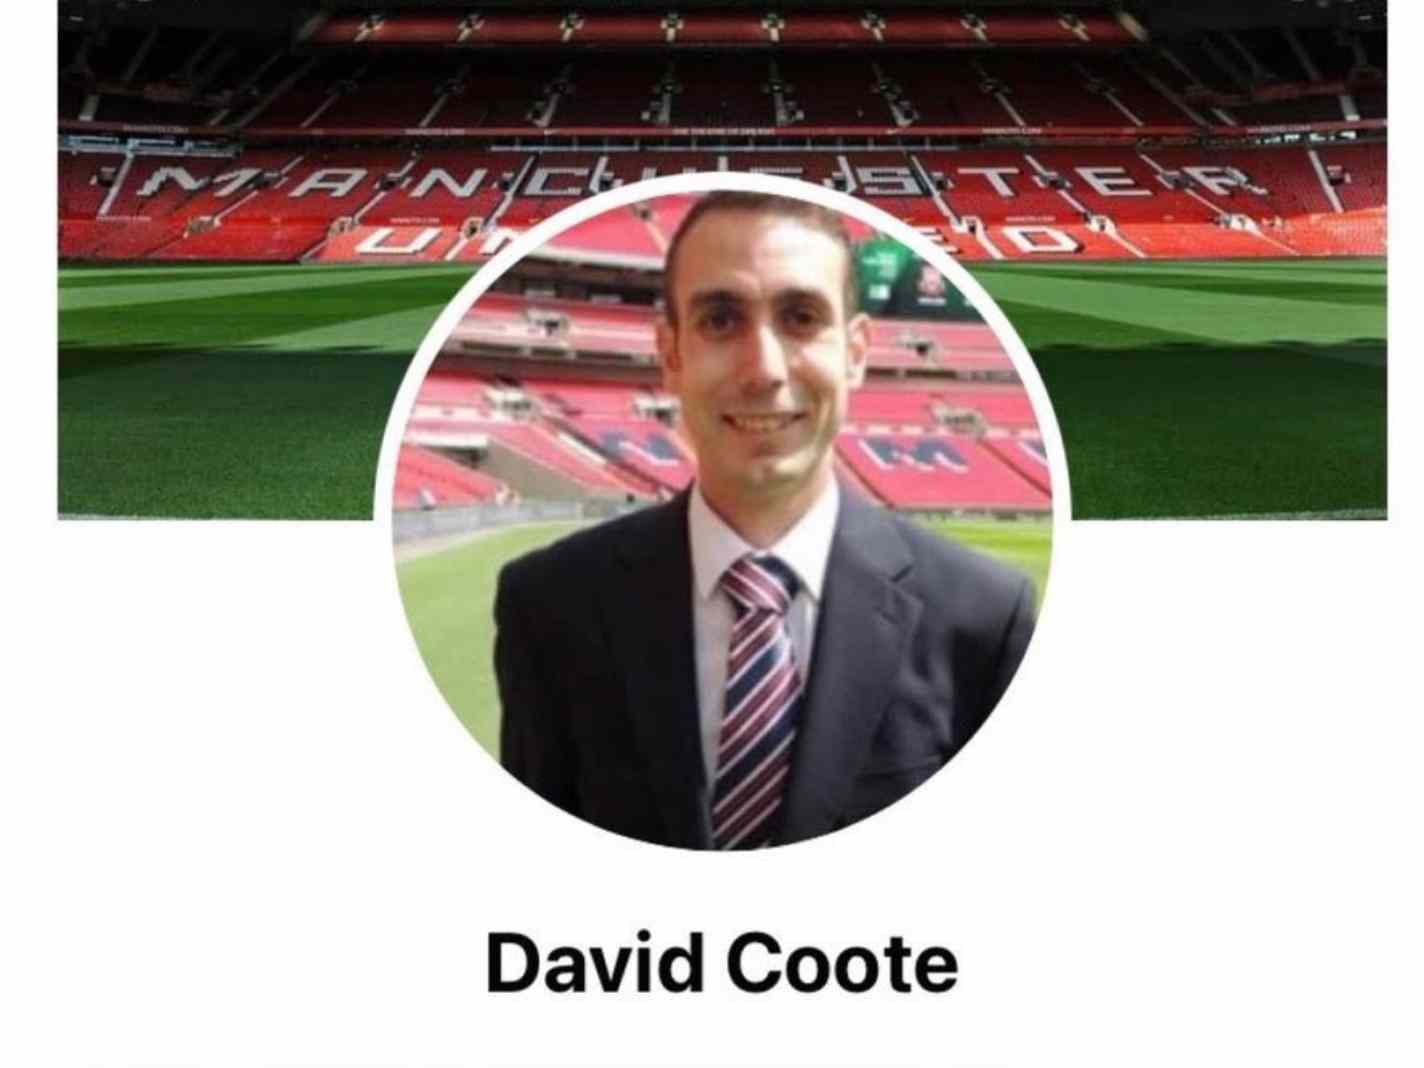 Is David Coote A Manchester United Fan? Here’s The Truth Behind Viral Facebook Screenshot